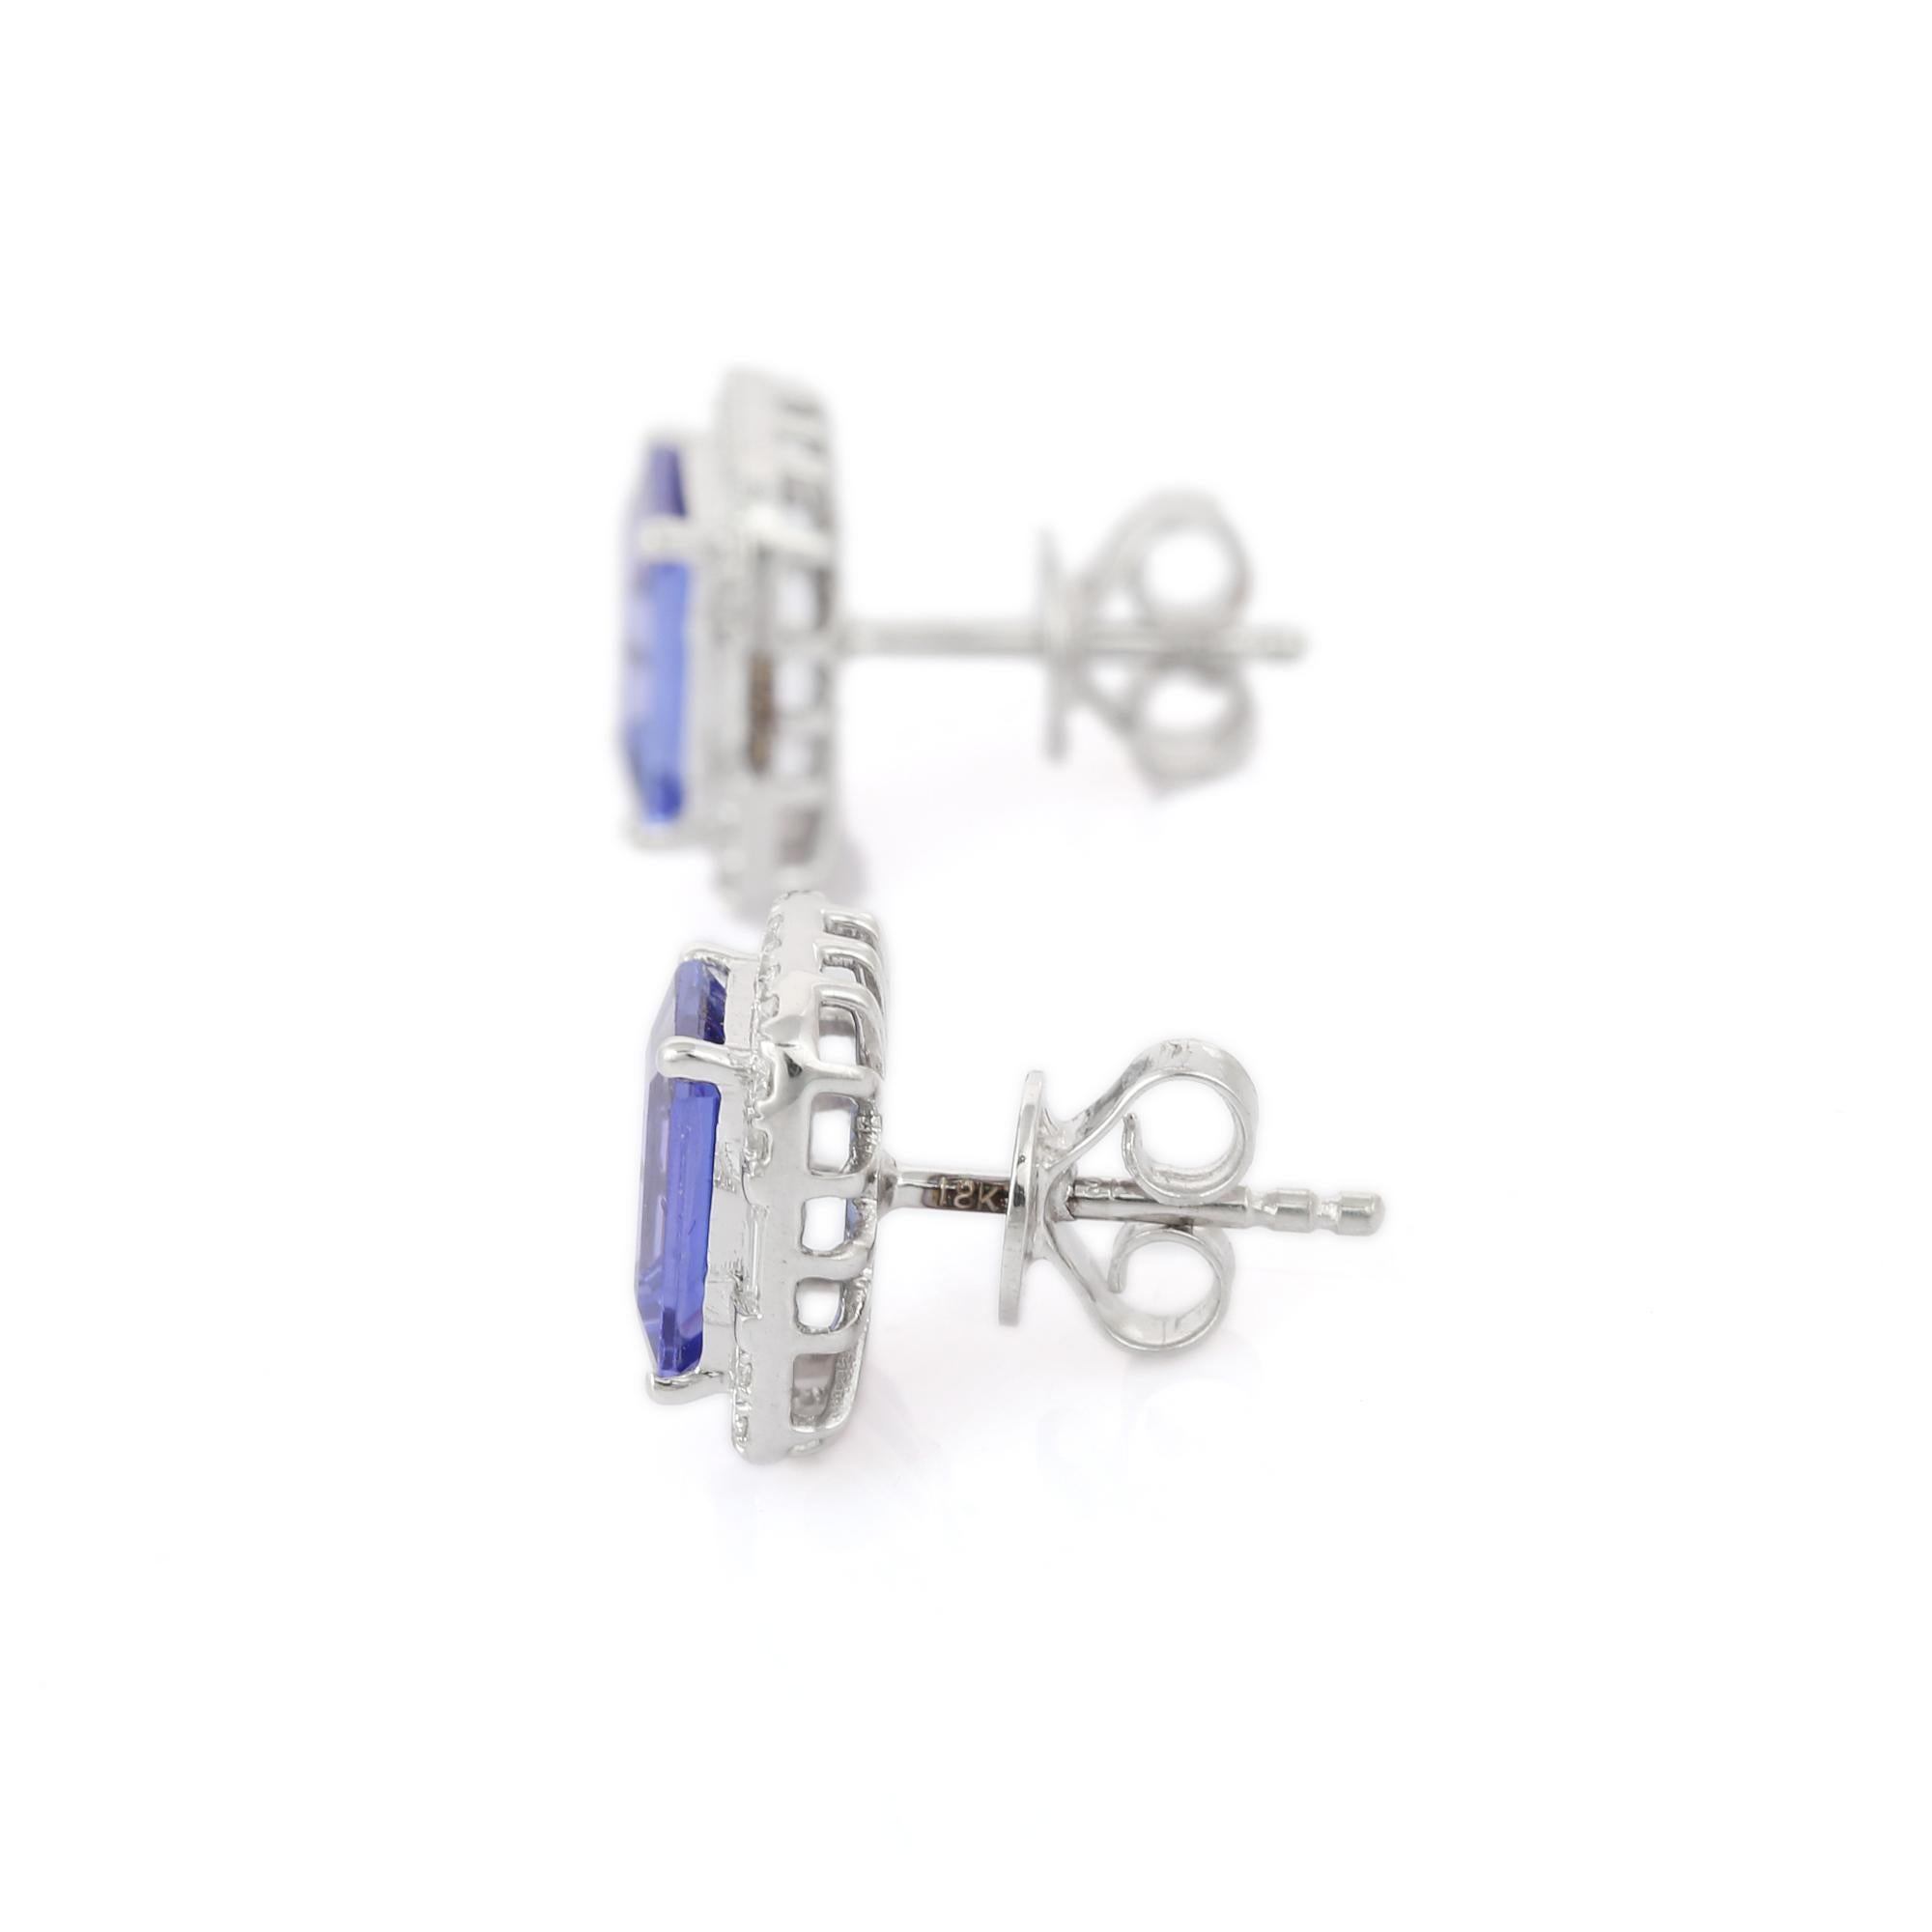 Octagon Cut 2.85 Carat Natural Tanzanite and Diamond Stud Earrings in 18K White Gold 